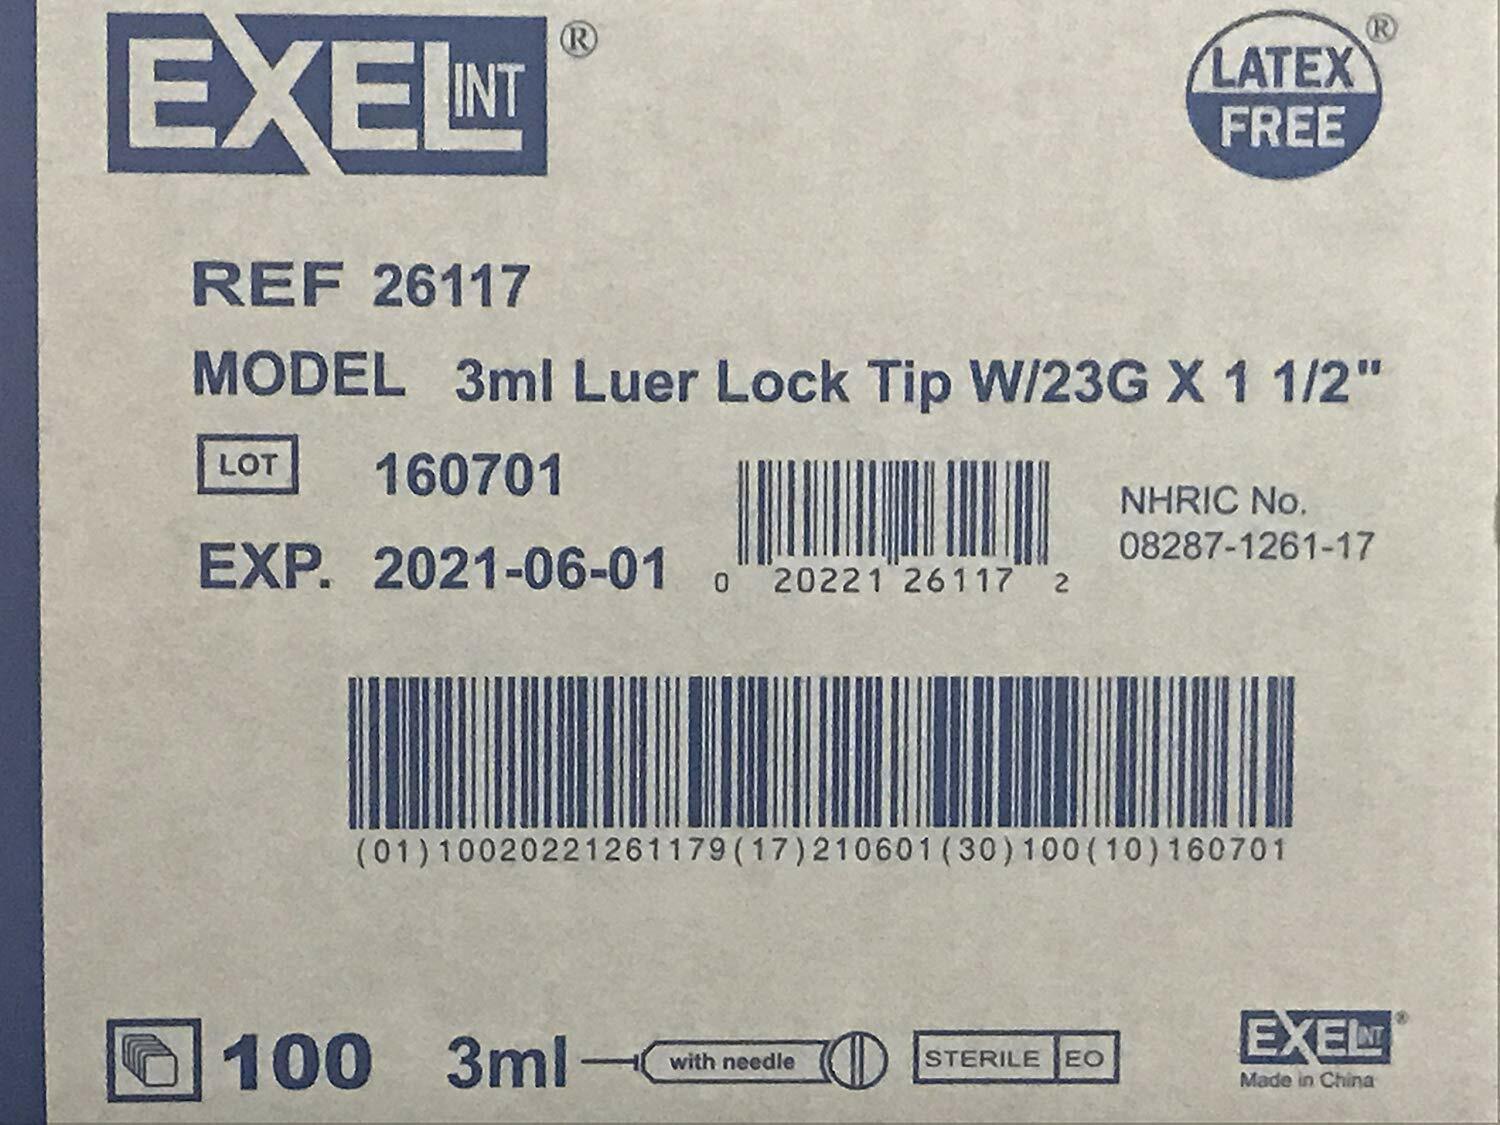 BRAND NEW Exel luer-Lock  3ml(3cc) 23g x 1.5in, 1 box of 100 26117 EXP 2023+